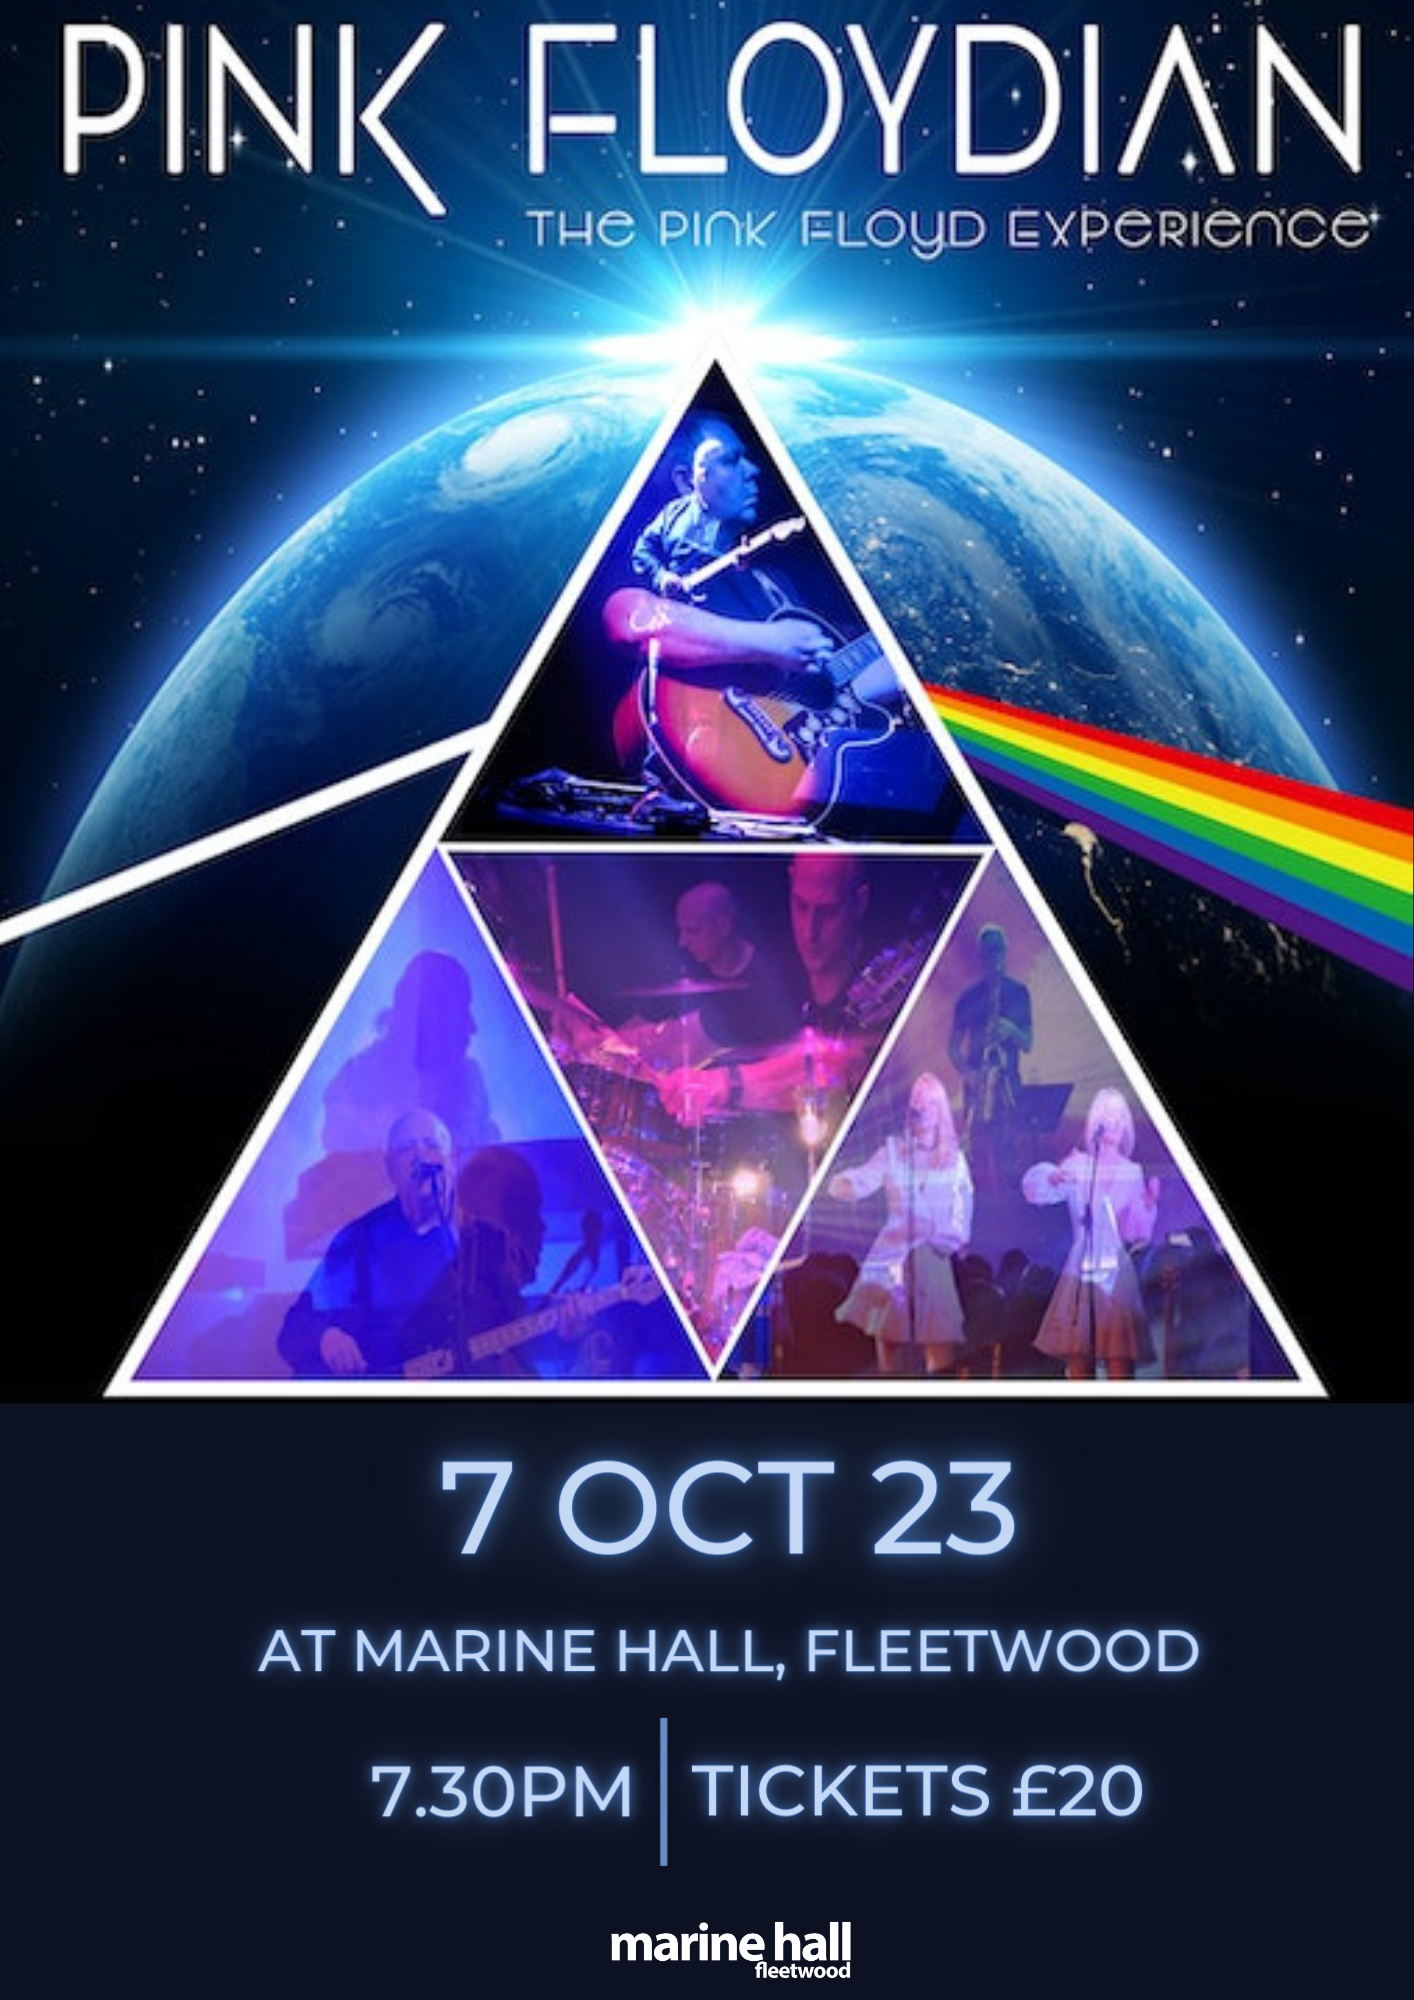 Pink Floydian, The Pink Floyd Experience. 7 Oct 23 at Marine Hall, Fleetwood. 7.30PM. Tickets £20